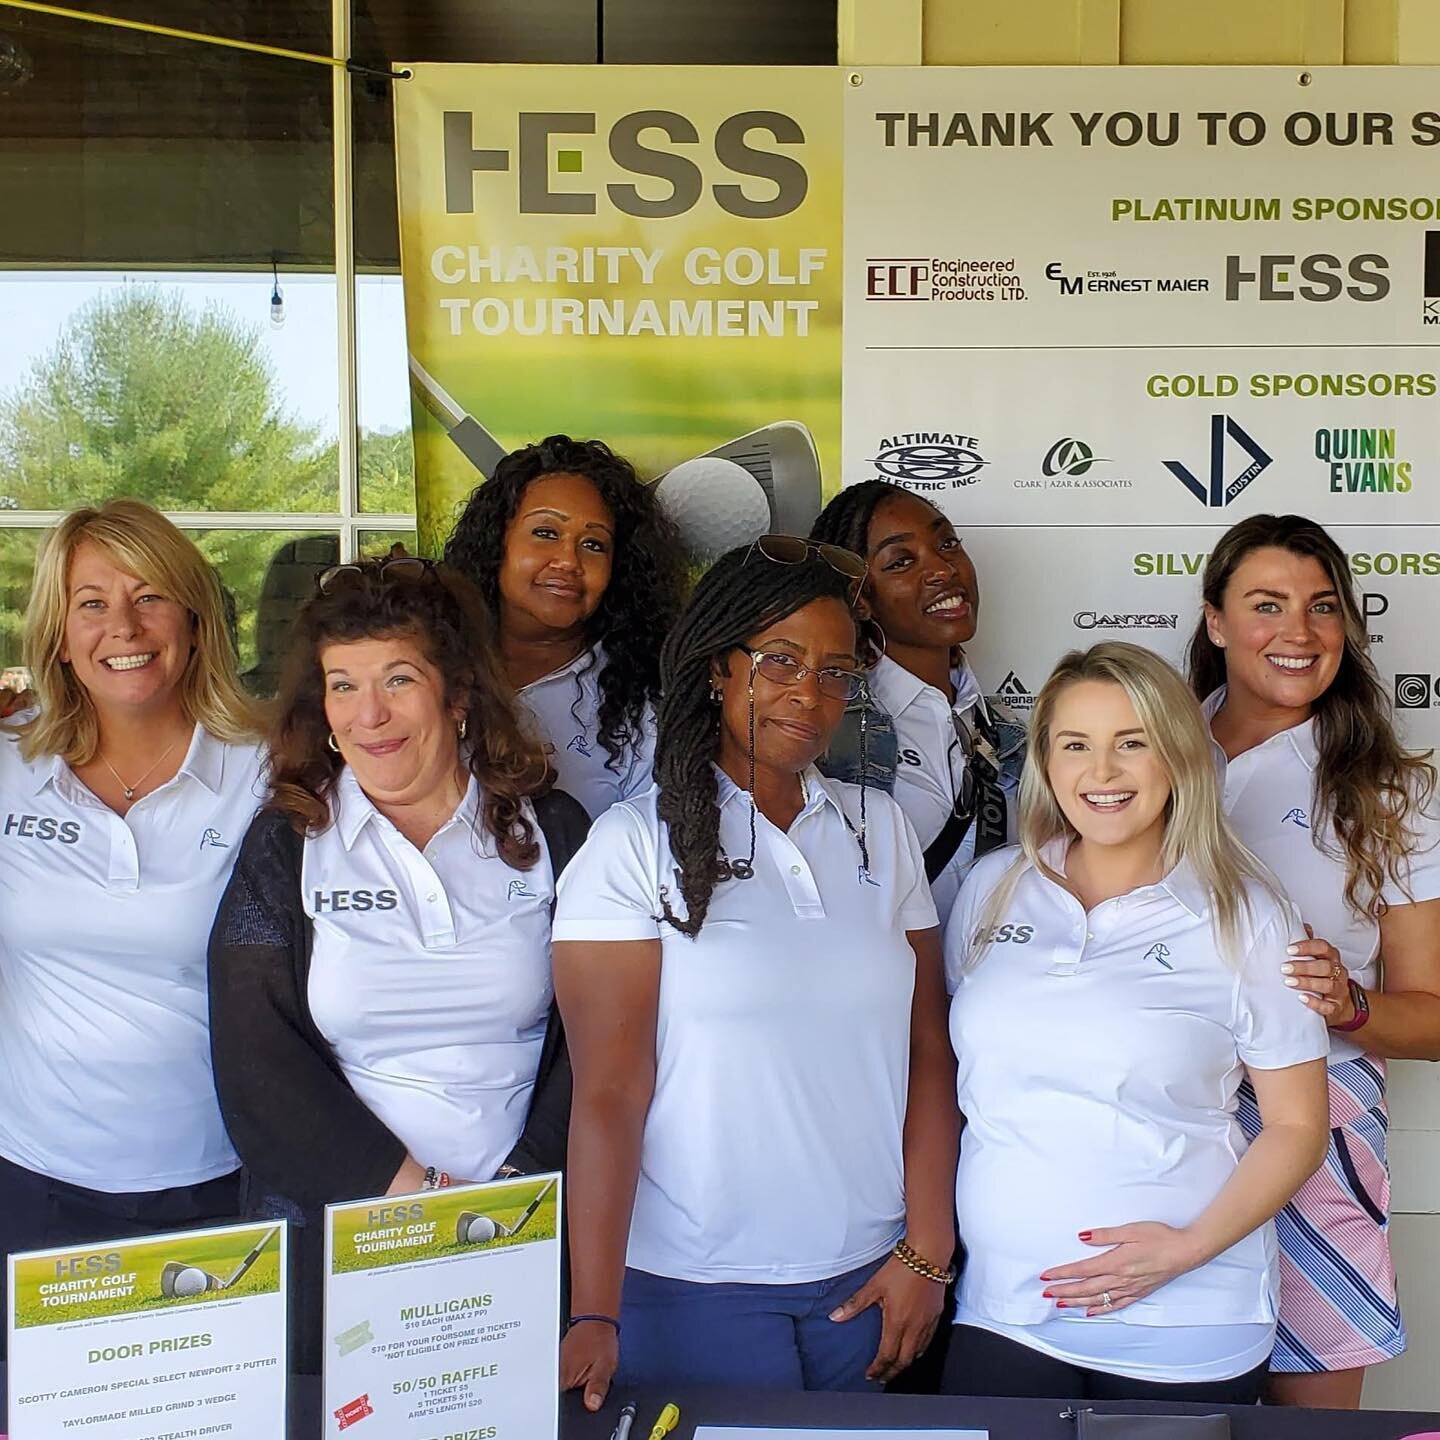 We had so much fun at our HESS Charity Golf Tournament last Friday that benefited the Montgomery County Students Construction Trades Foundation! Thank you to all of our sponsors and all those who participated in this successful event! ⛳️

#Montgomery